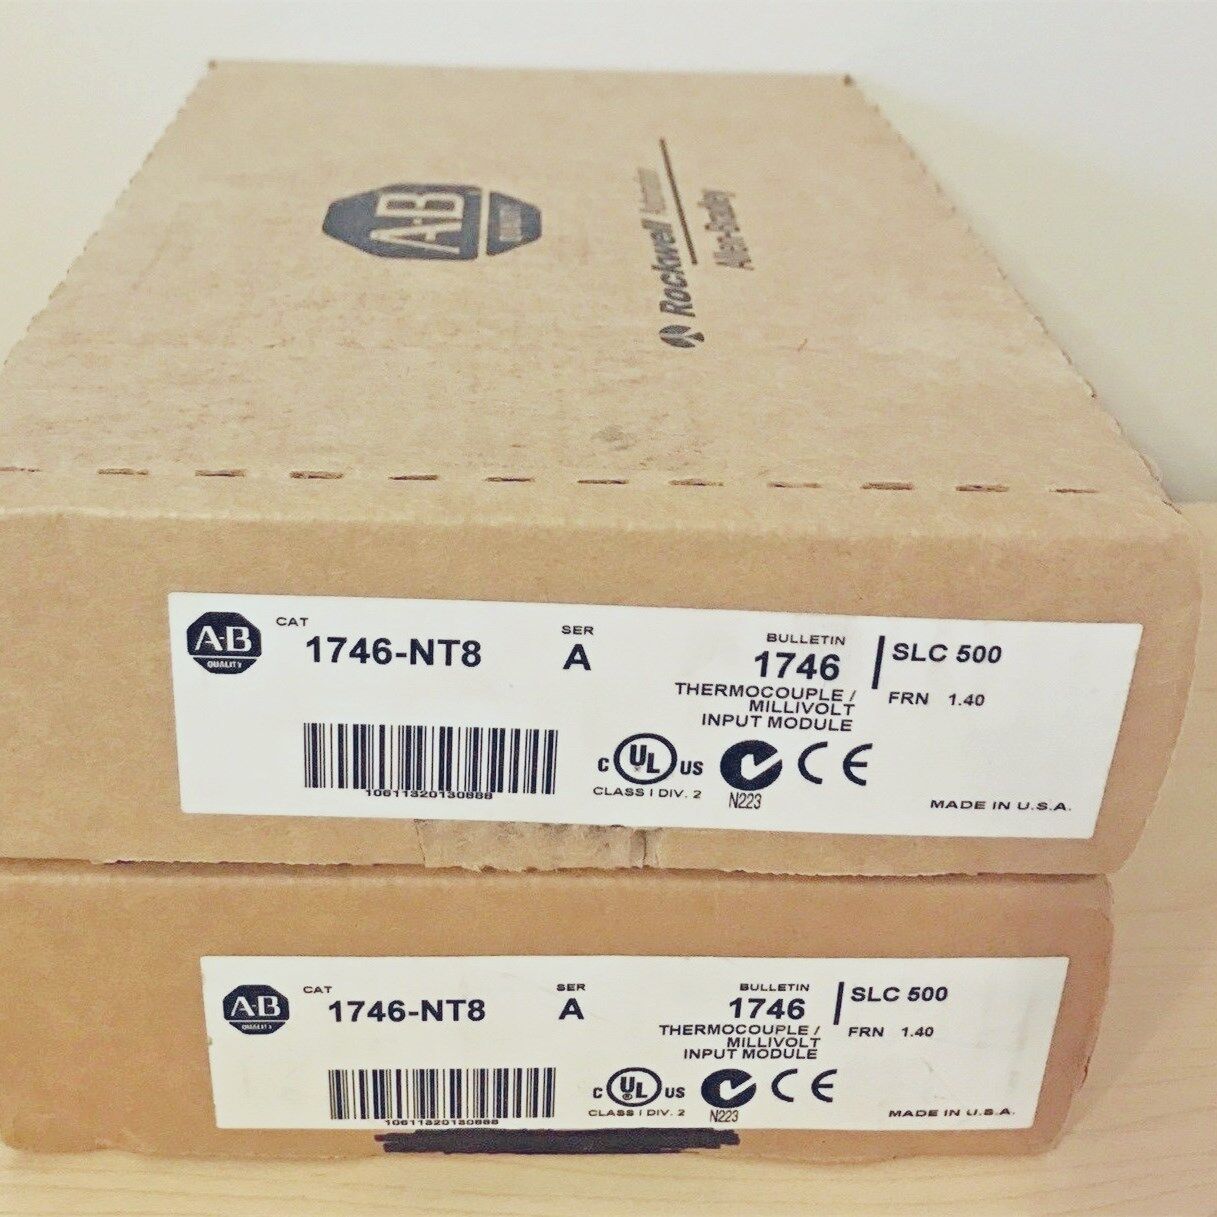 1 PCS Factory Sealed AB 1746-NT8 SER A SLC 500 Thermocouple Input Module 1746NT8